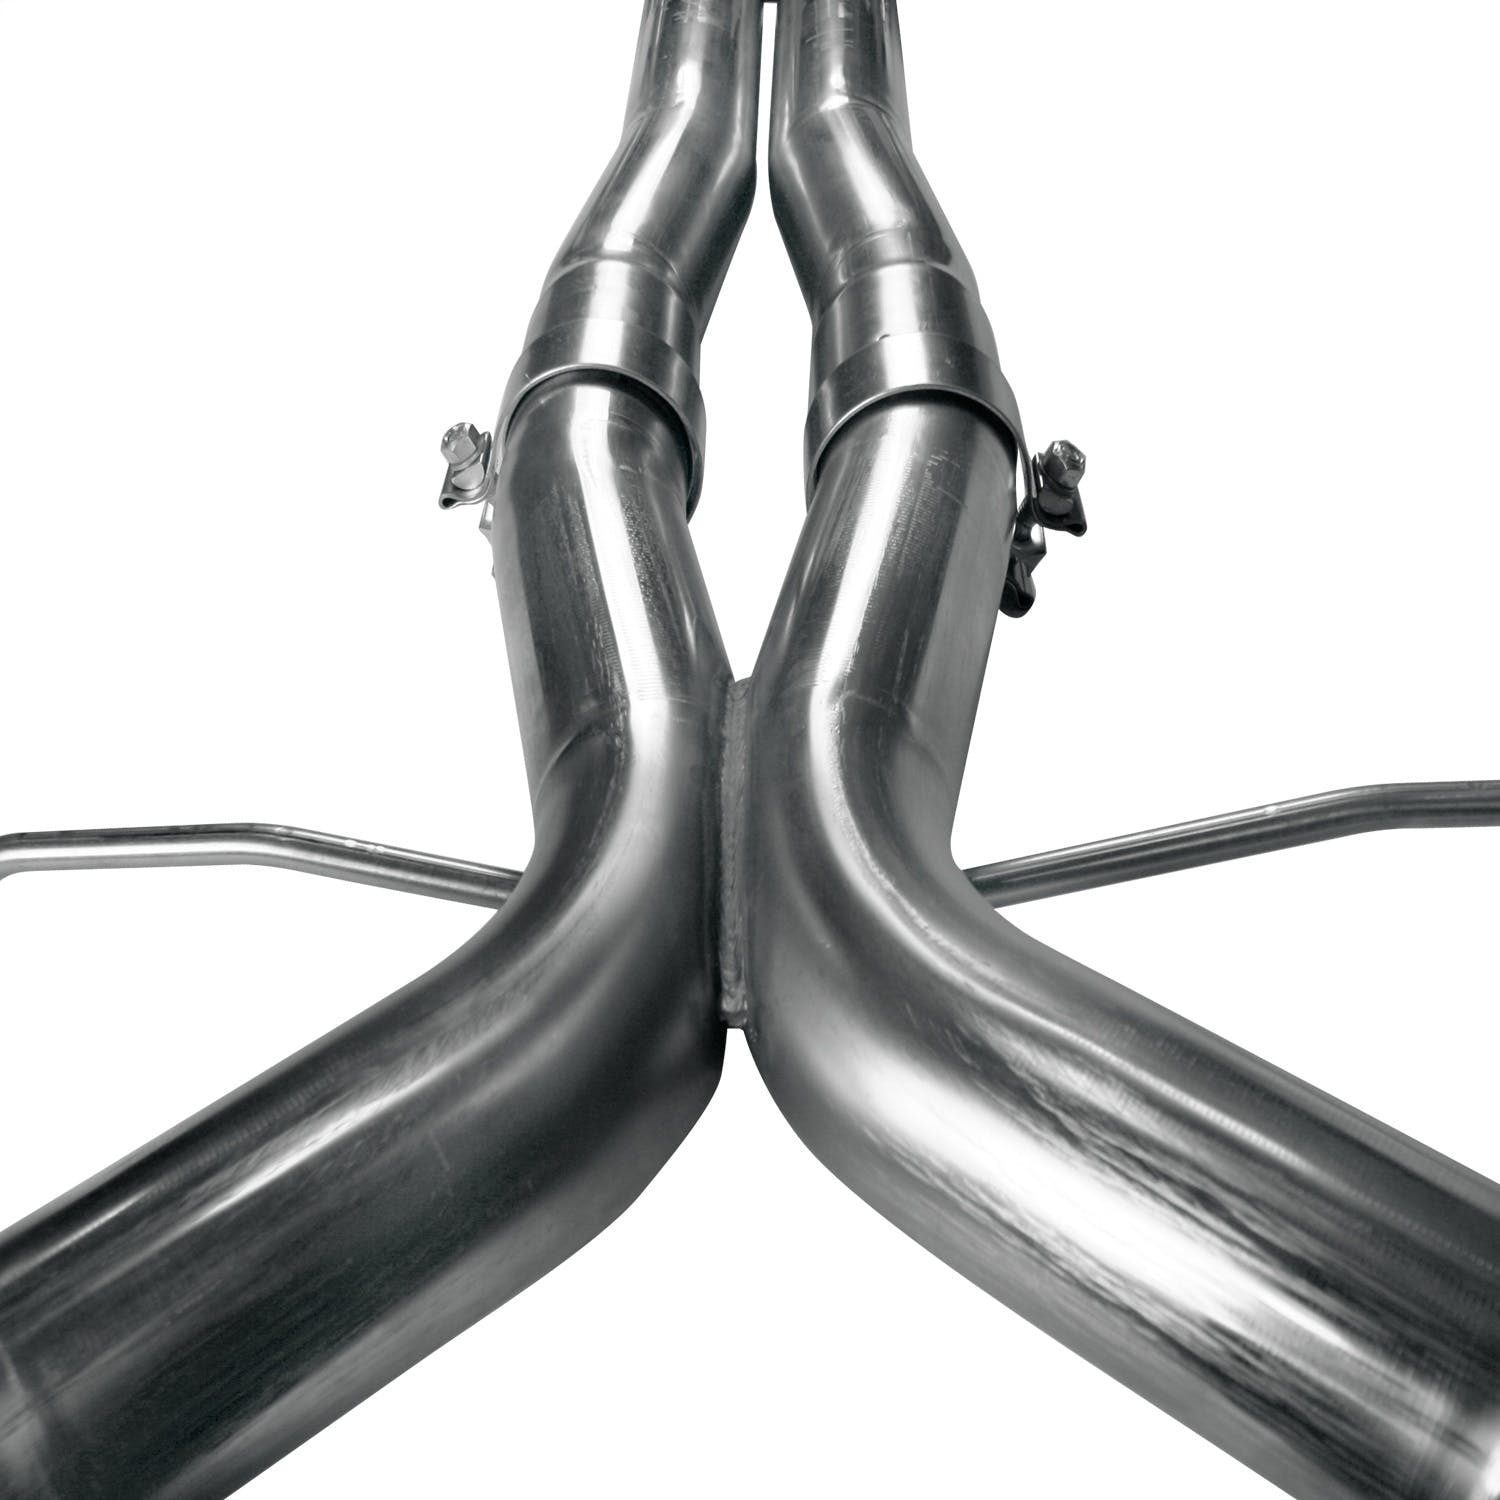 Kooks Custom Headers 34104250 3in. Cat Back Stainless Steel Exhaust System. Includes X-Pipe and Kooks Mufflers